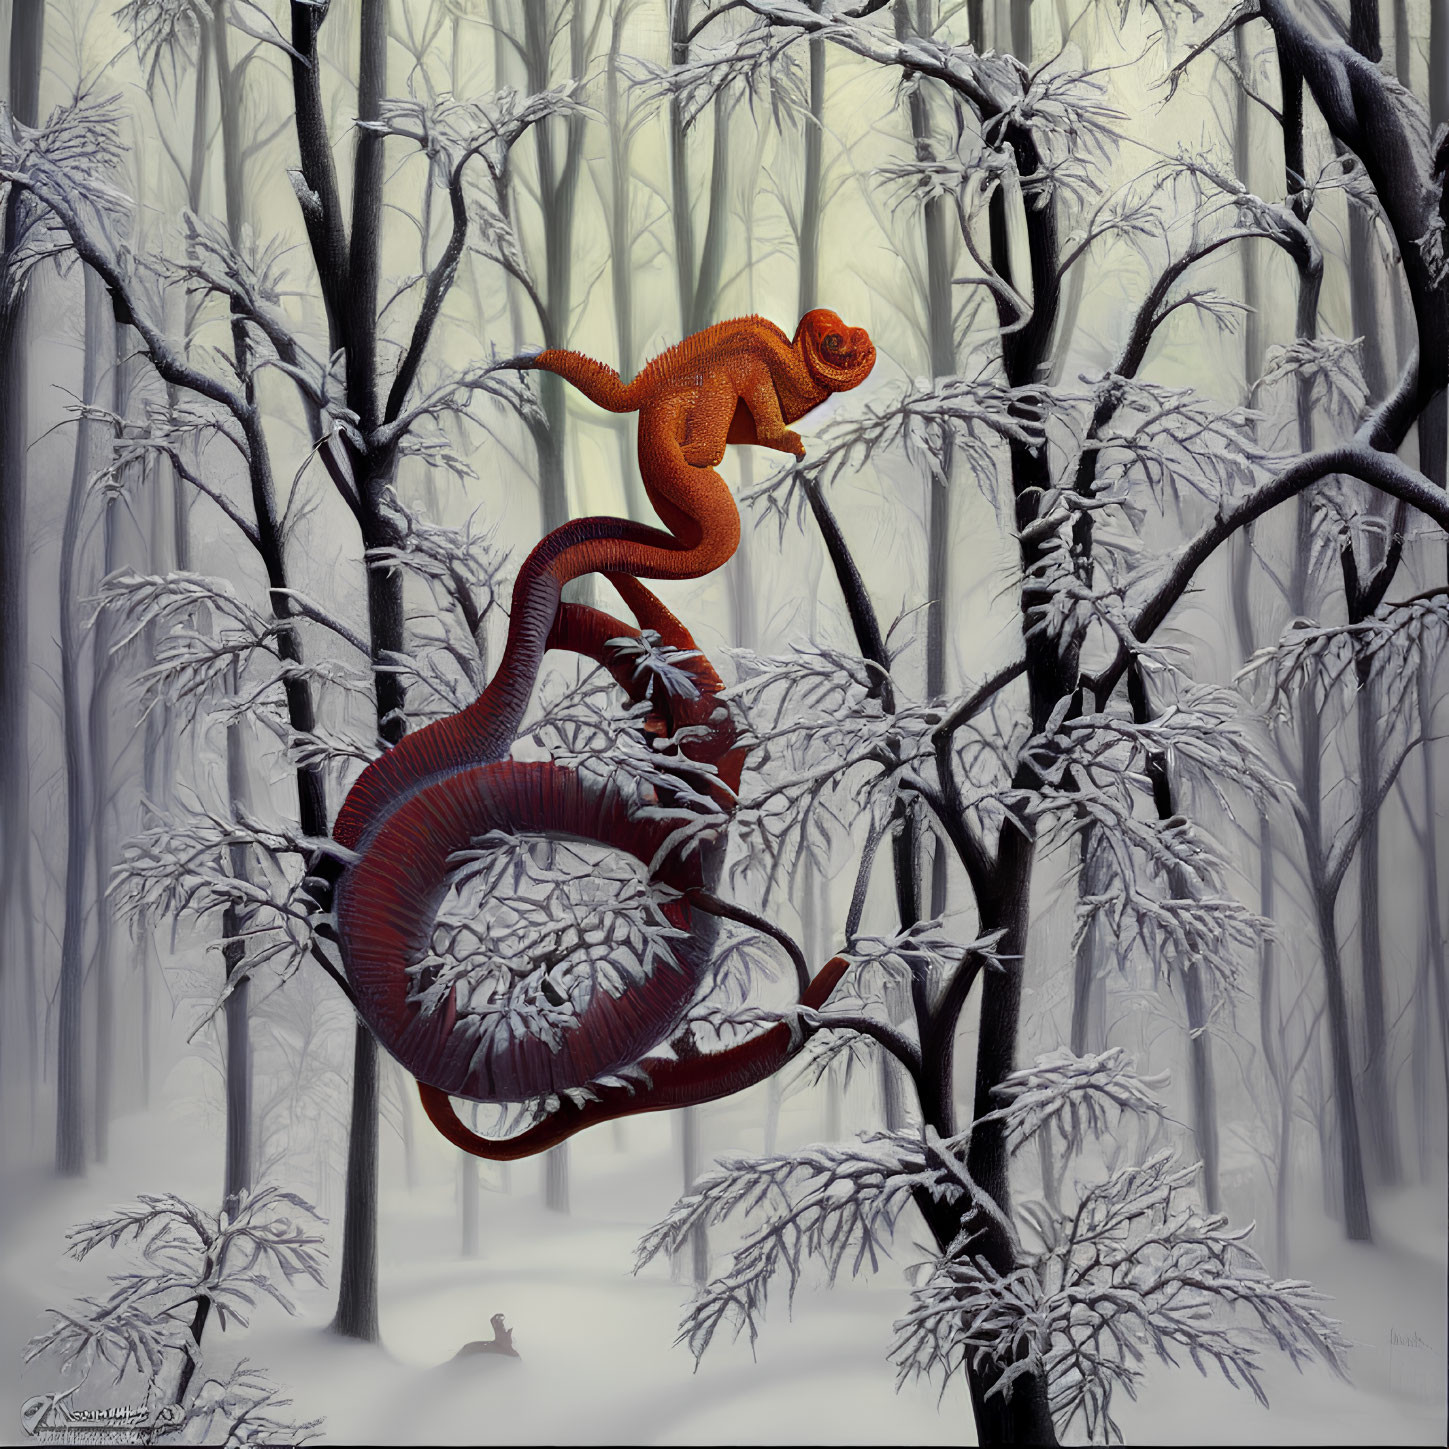 Orange Chameleon on Branch in Snowy Forest with Bare Trees